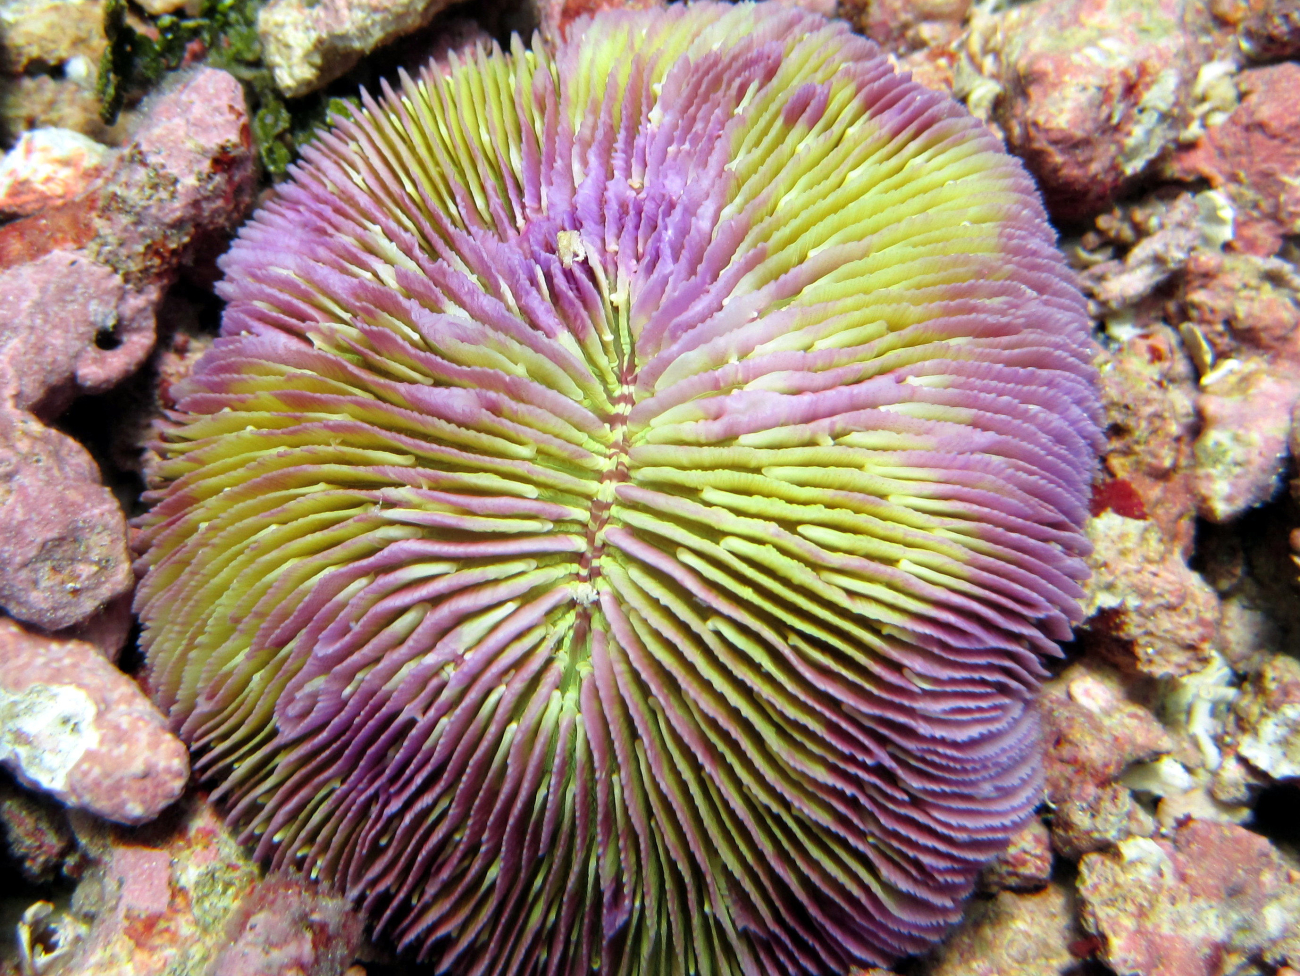 A purple and green mushroom coral